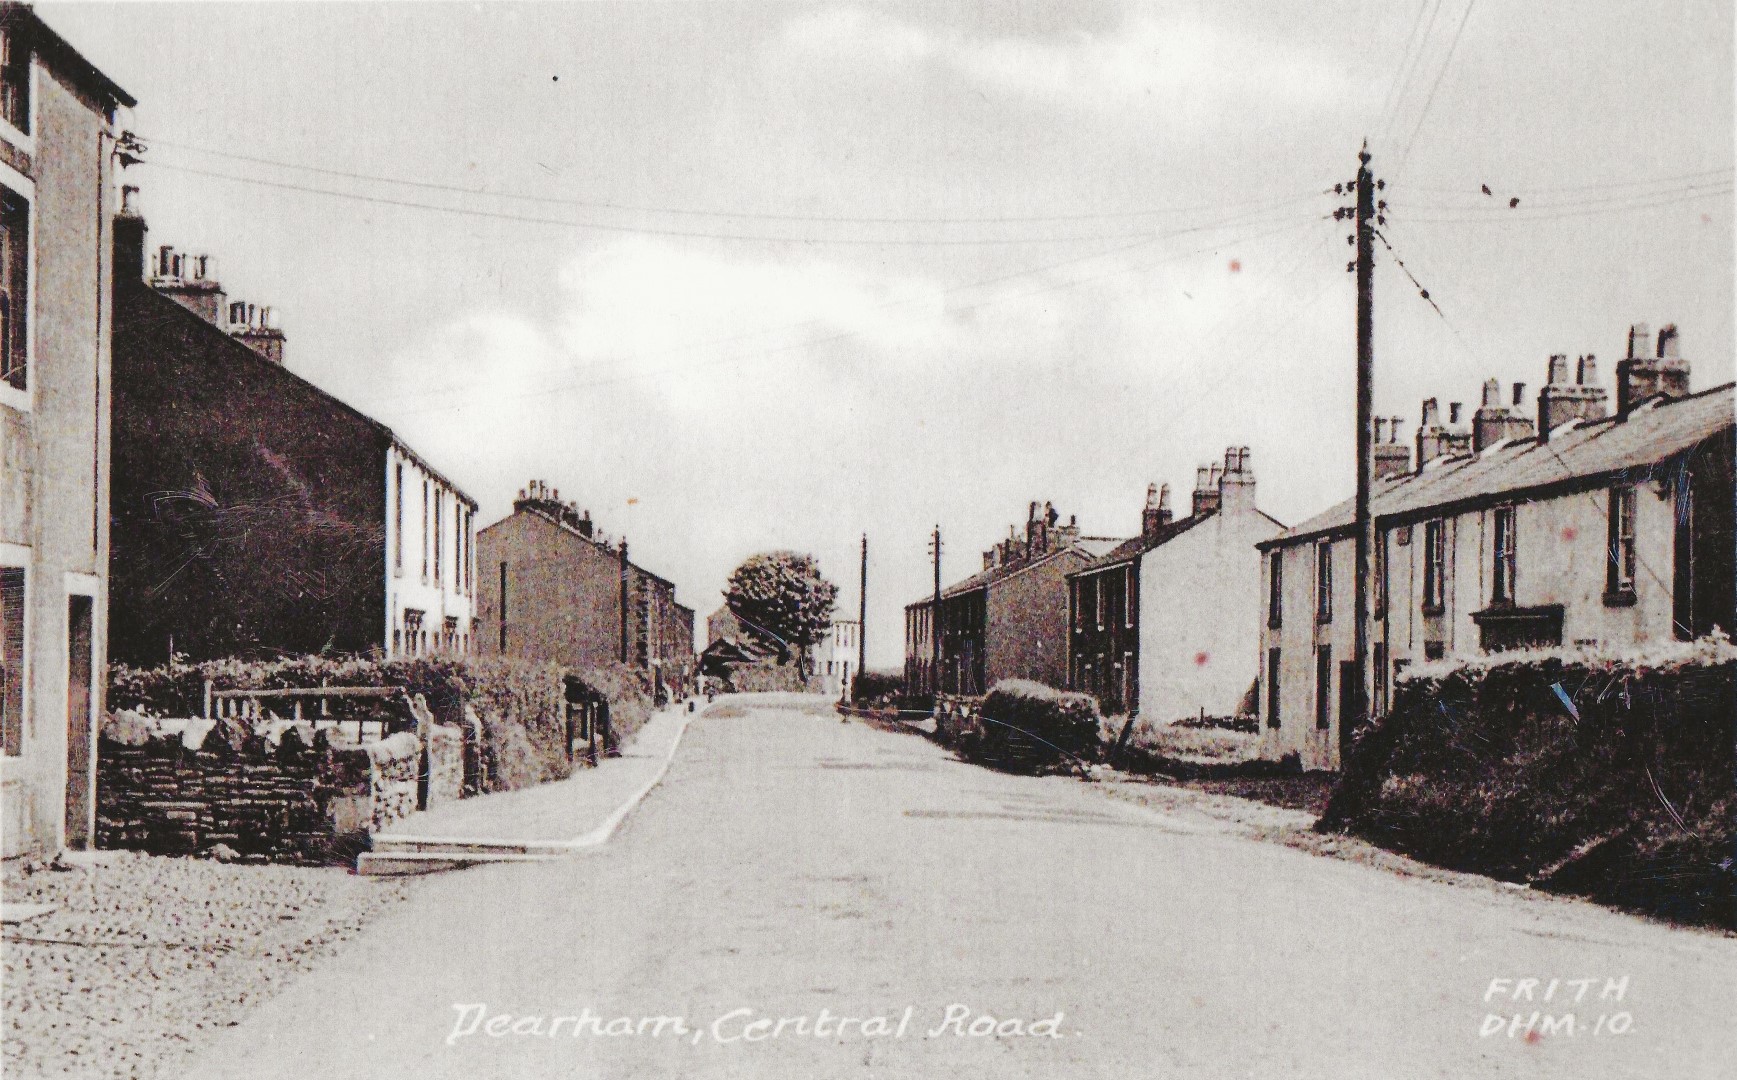 Dearham Central Road